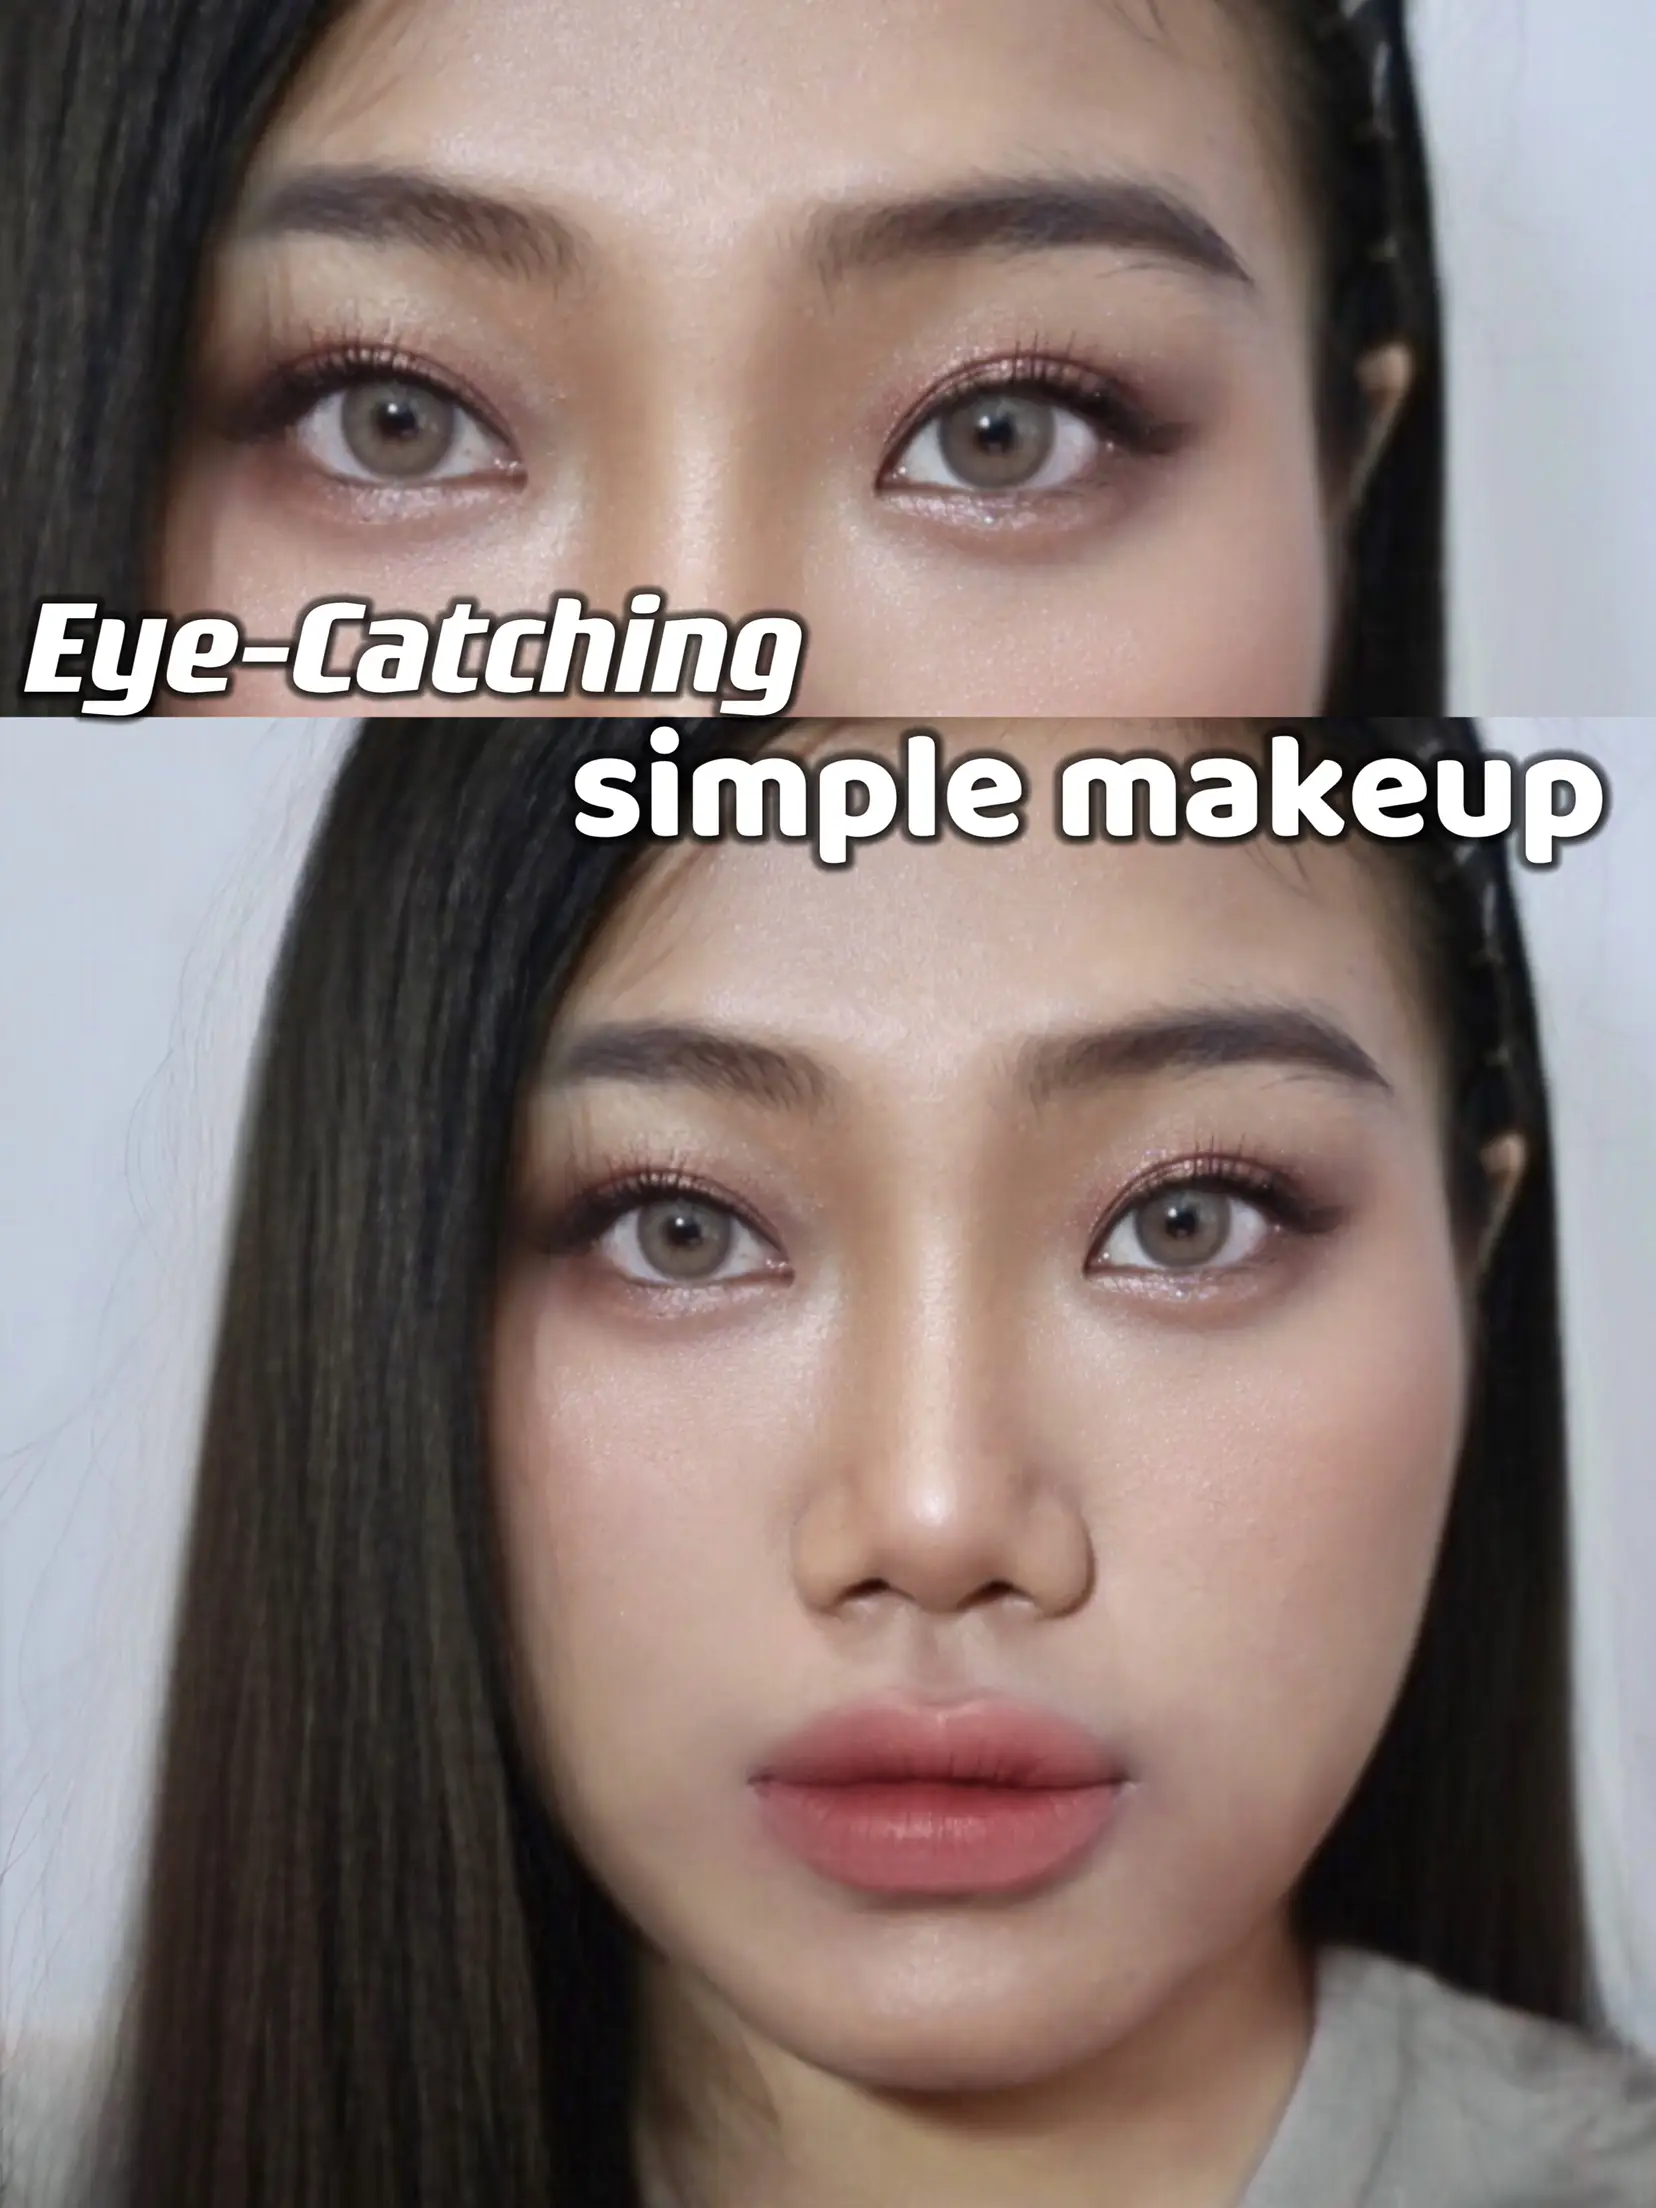 i love this makeup look, its so simple and cute! #makeuptutorial